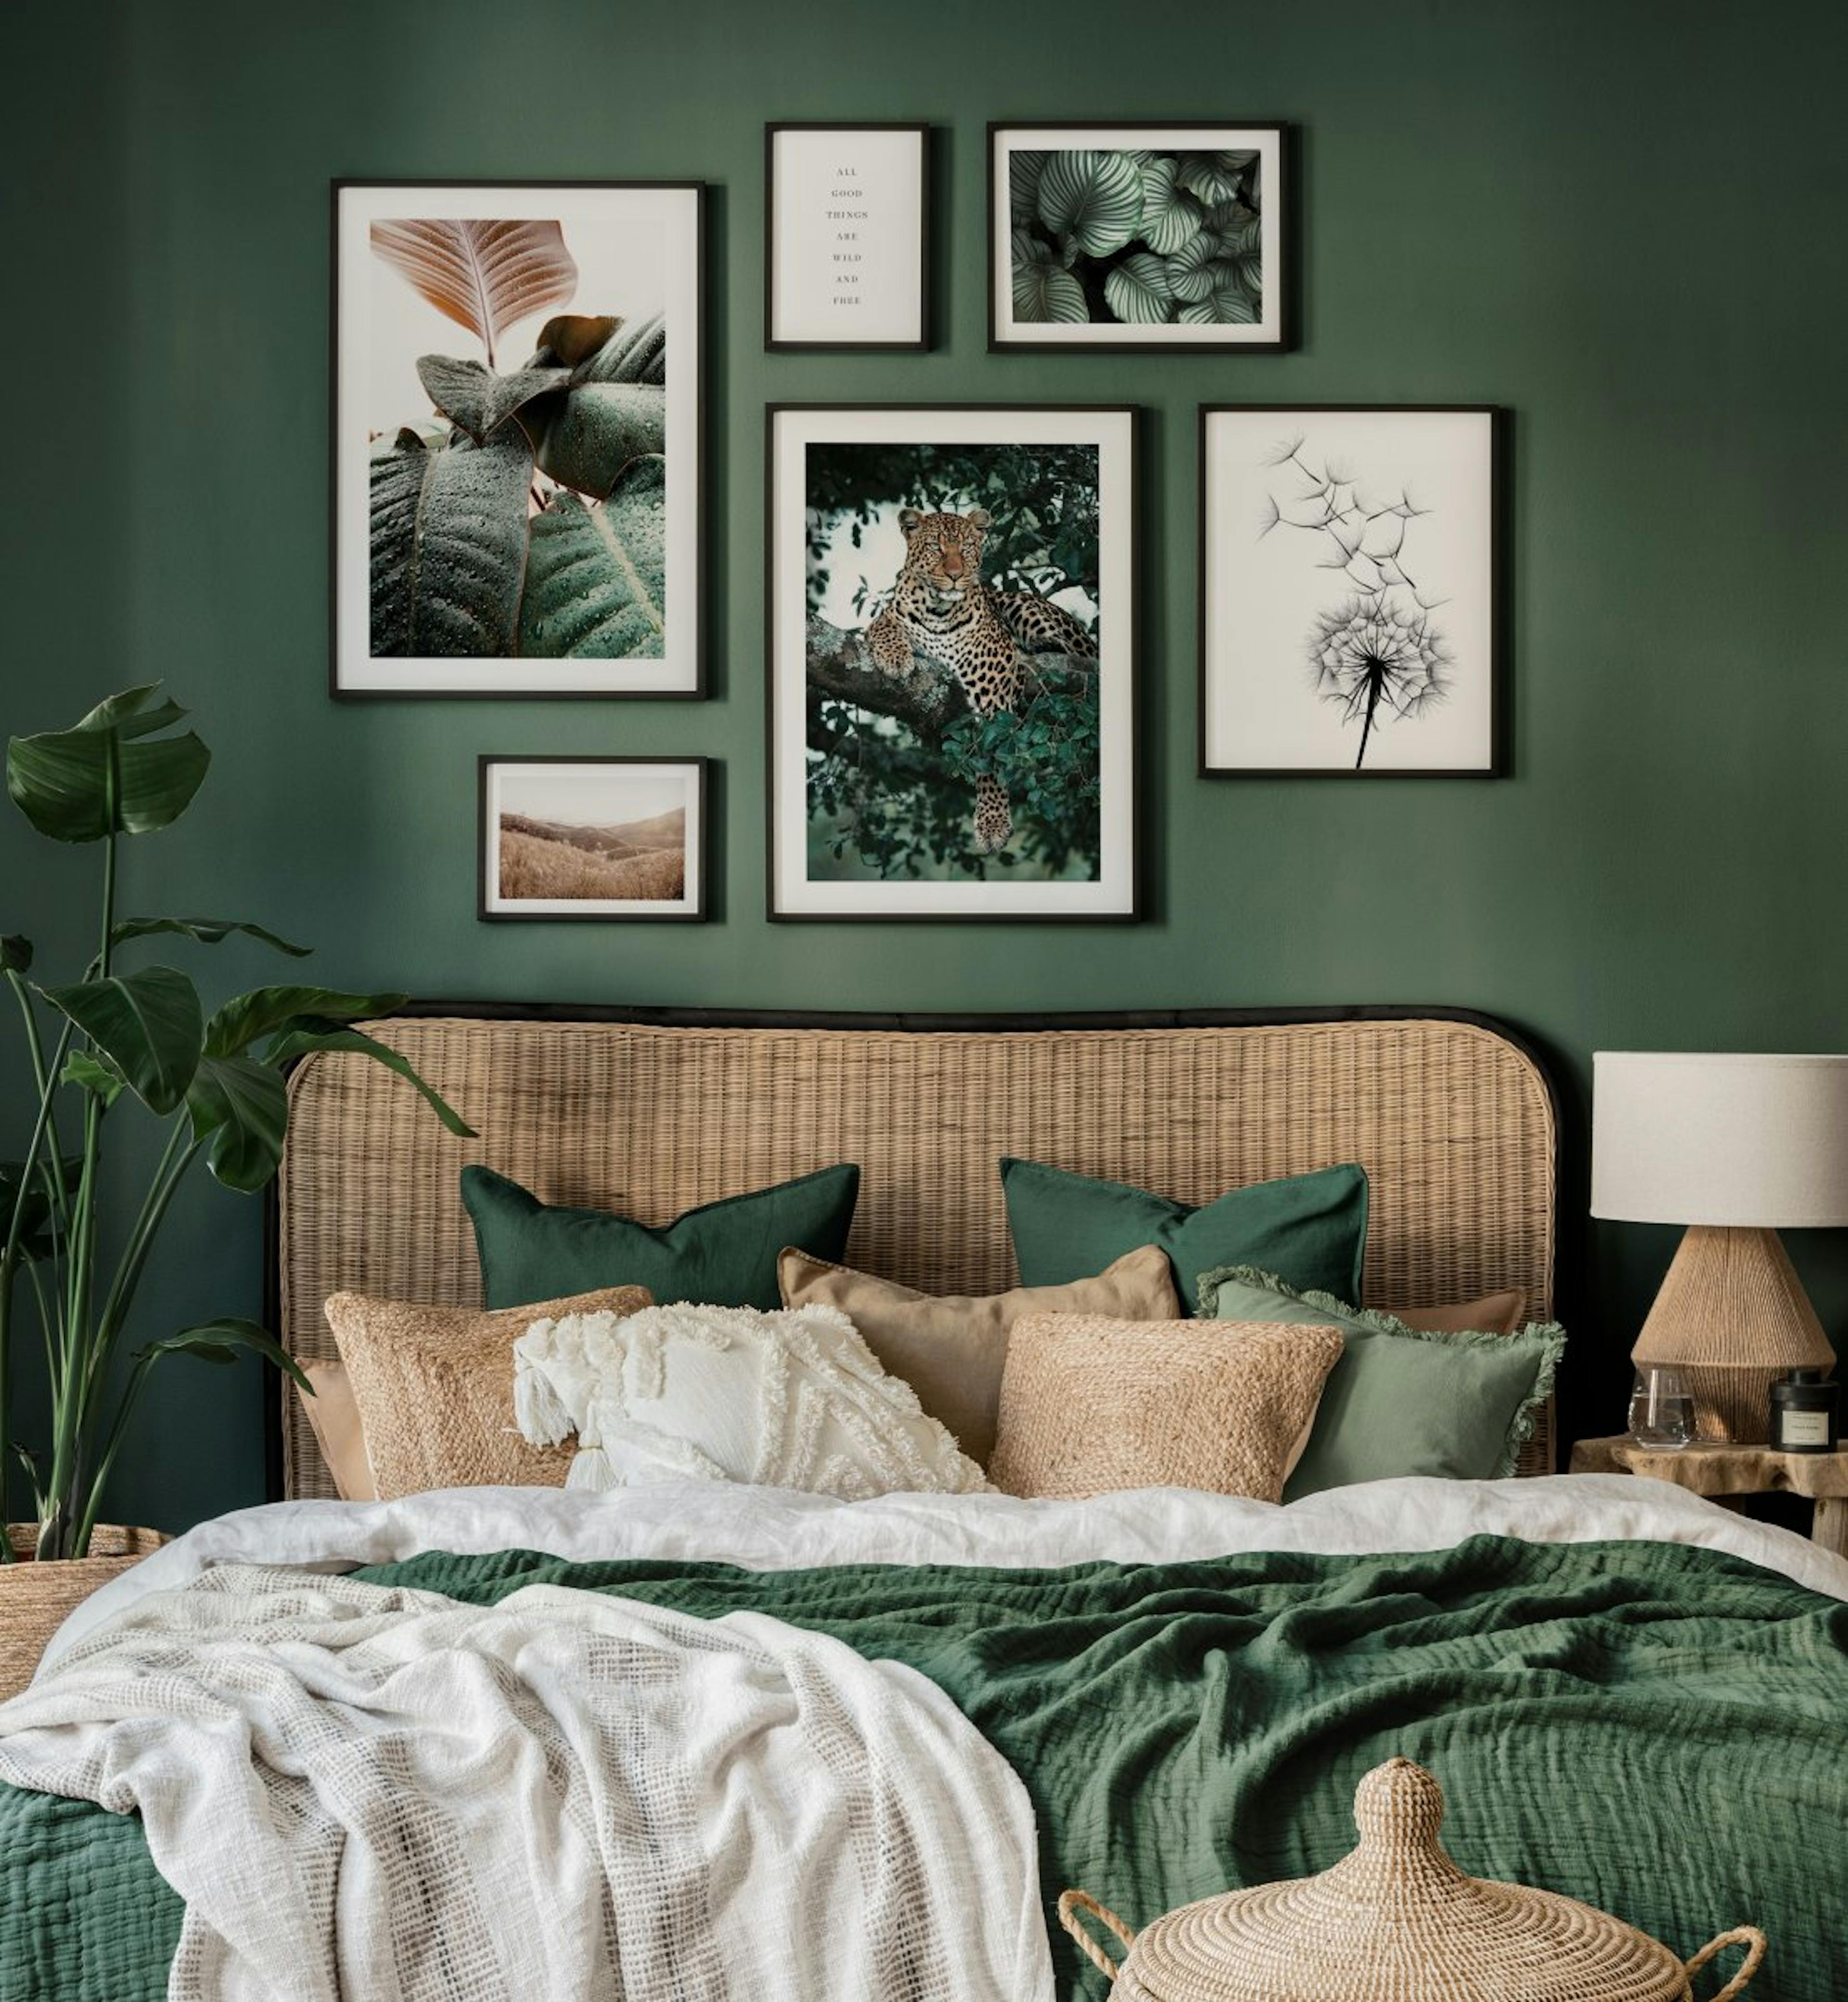 Animal posters and dark green botanical prints in bedroom